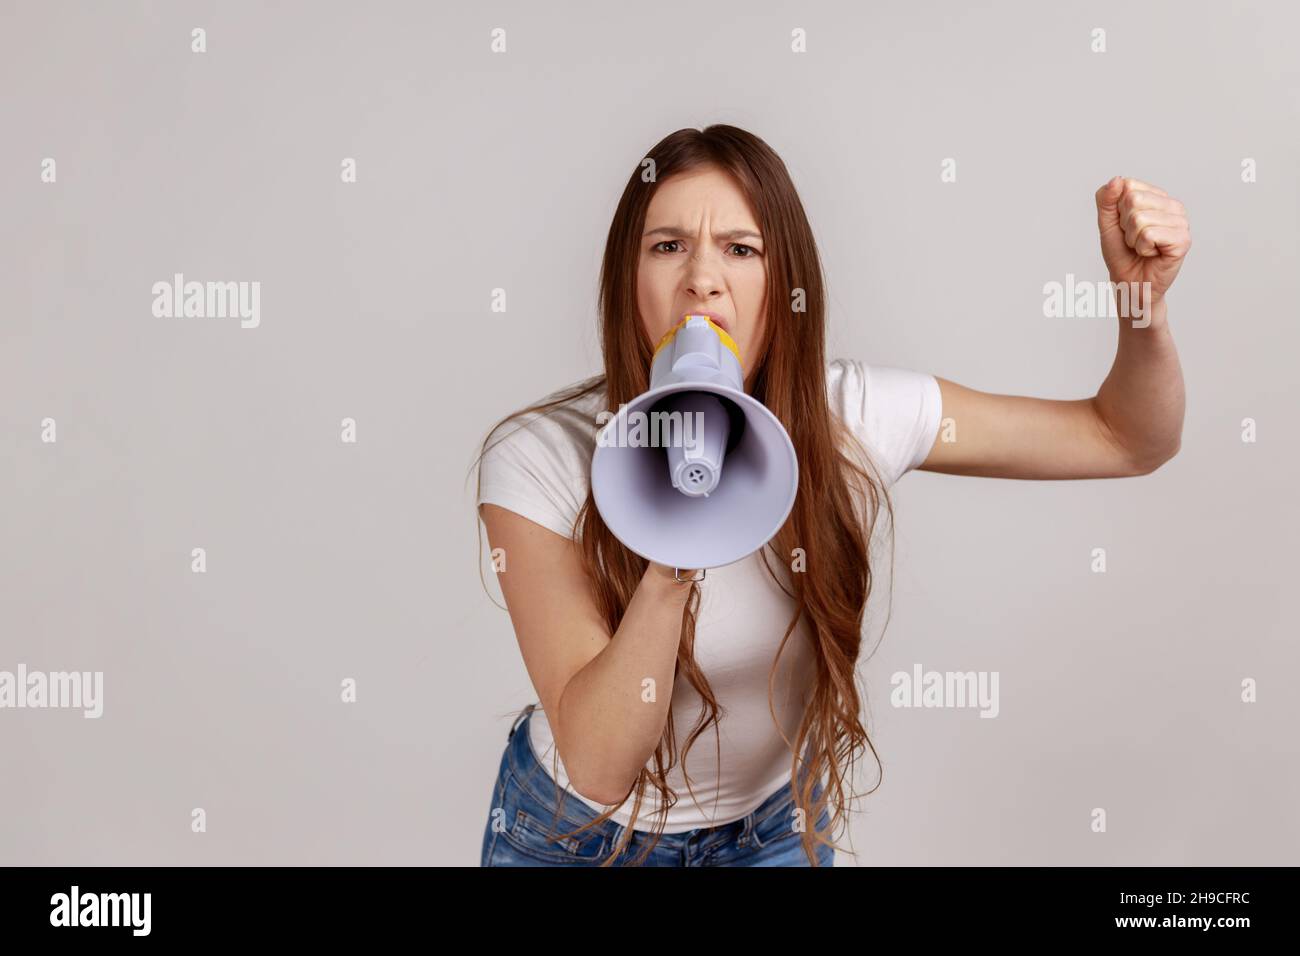 Portrait of woman holding megaphone near mouth, loudly speaking, screaming, making announcement with raised arm, protesting, wearing white T-shirt. Indoor studio shot isolated on gray background. Stock Photo